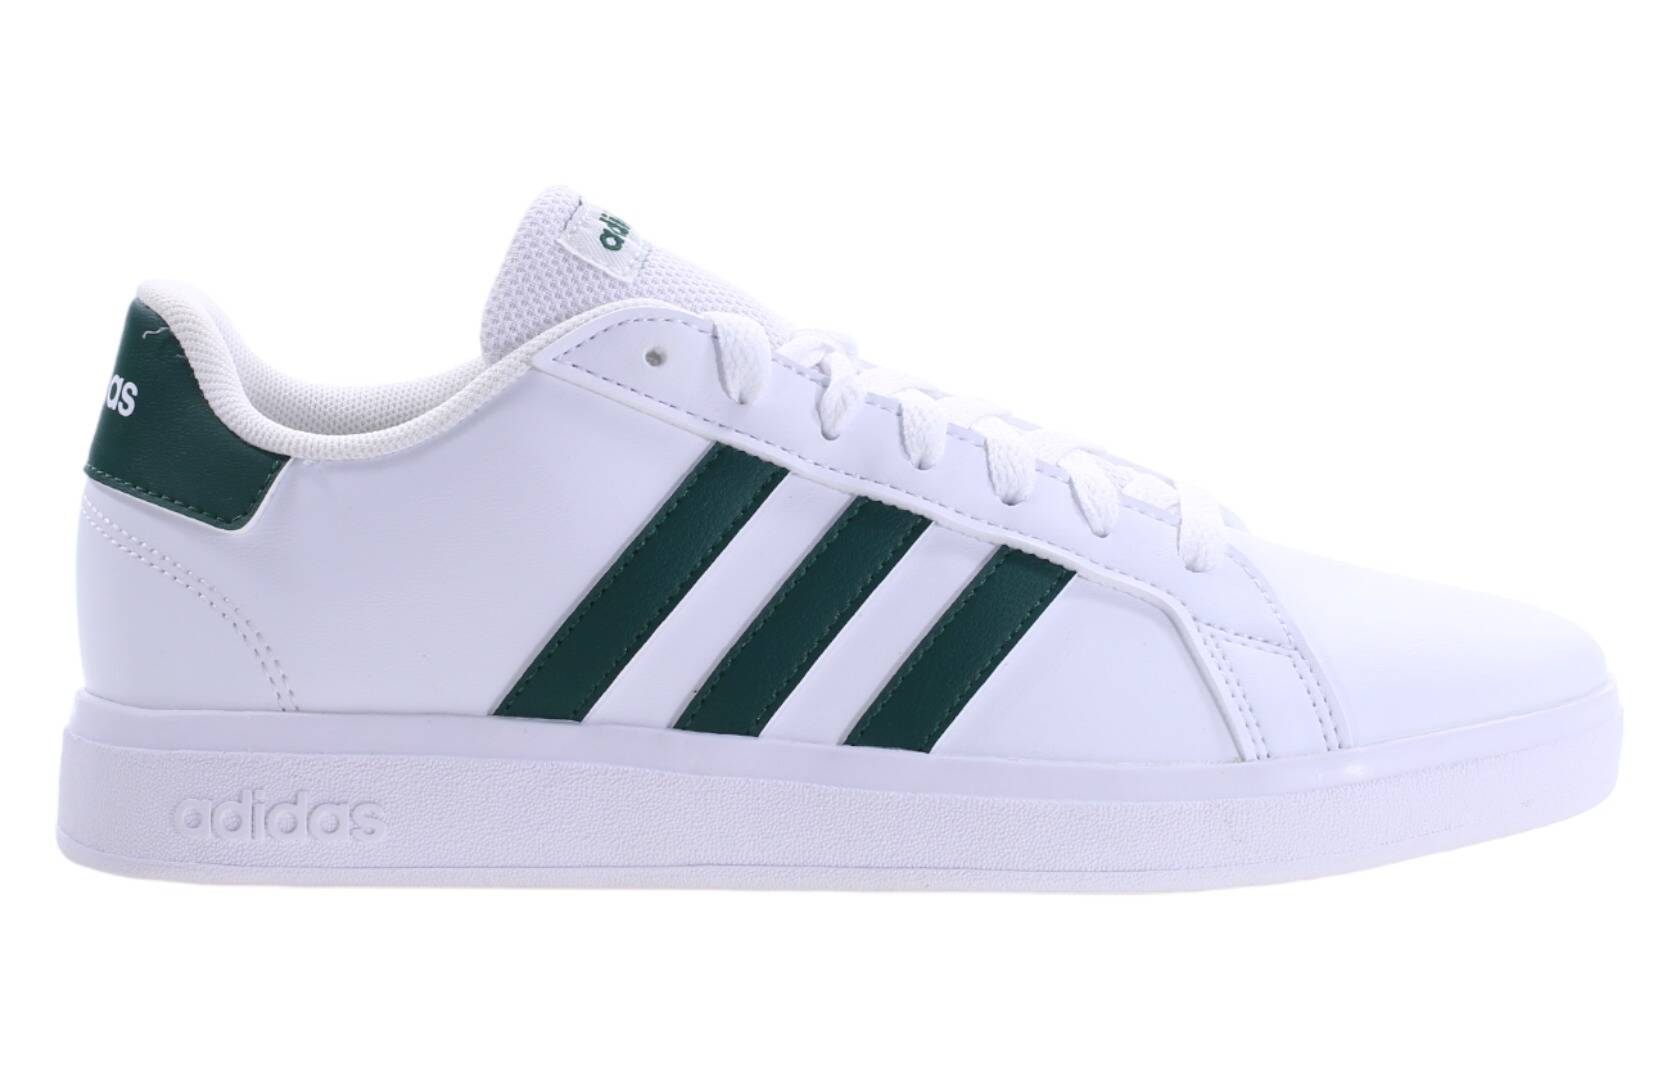 Adidas GRAND COURT 2.0 K IG4830 youth shoes